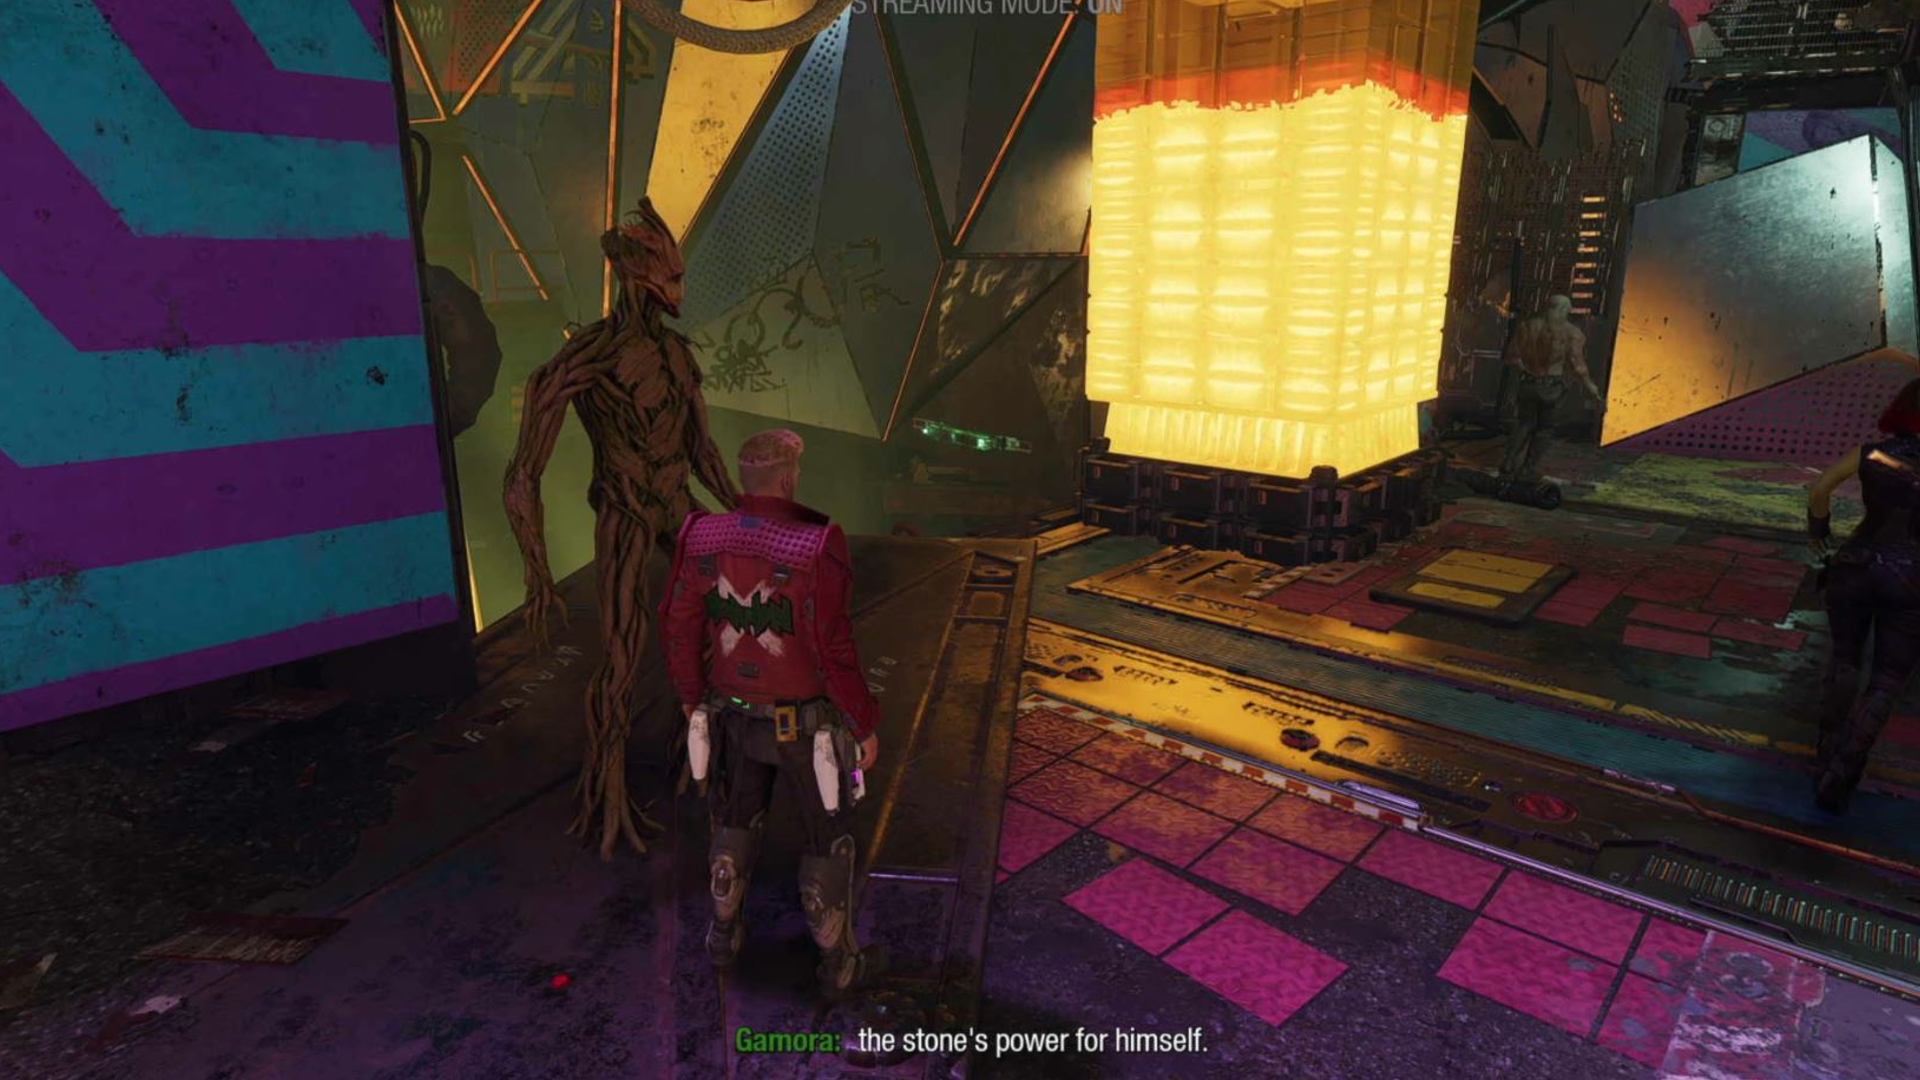 Guardians of the Galaxy outfit locations: Star-Lord is looking at the black panel which can be pulled off.